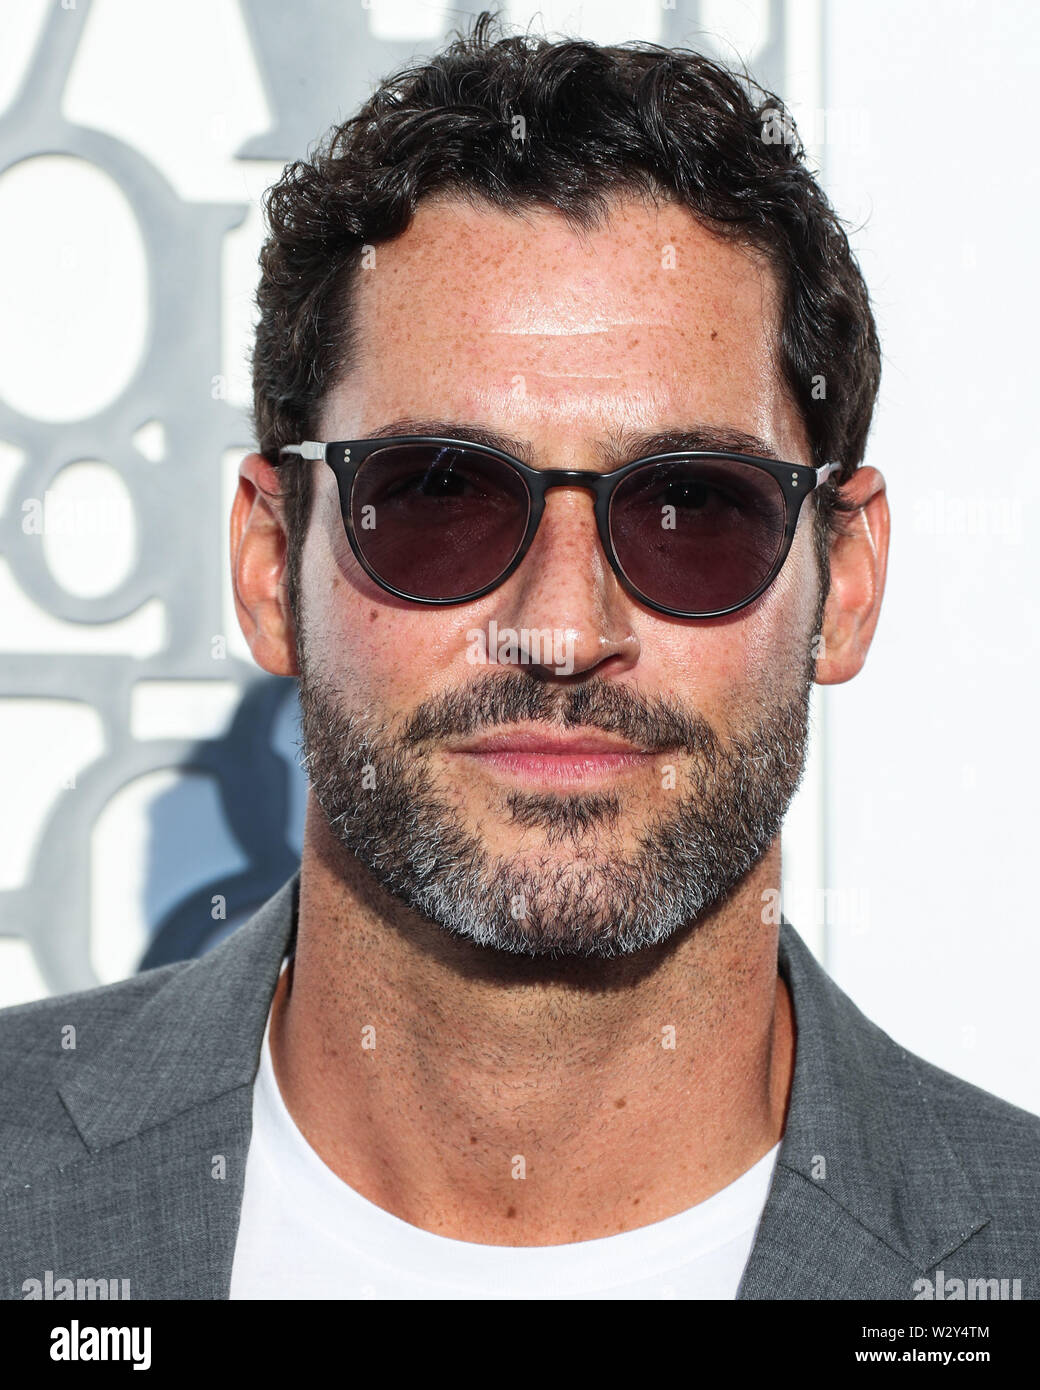 BEVERLY HILLS, LOS ANGELES, CALIFORNIA, USA - JULY 10: Actor Tom Ellis arrives at the American Friends Of Covent Garden 50th Anniversary Celebration held at Jean-Georges Beverly Hills at Waldorf Astoria Beverly Hills on July 10, 2019 in Beverly Hills, Los Angeles, California, United States. (Photo by Xavier Collin/Image Press Agency) Stock Photo